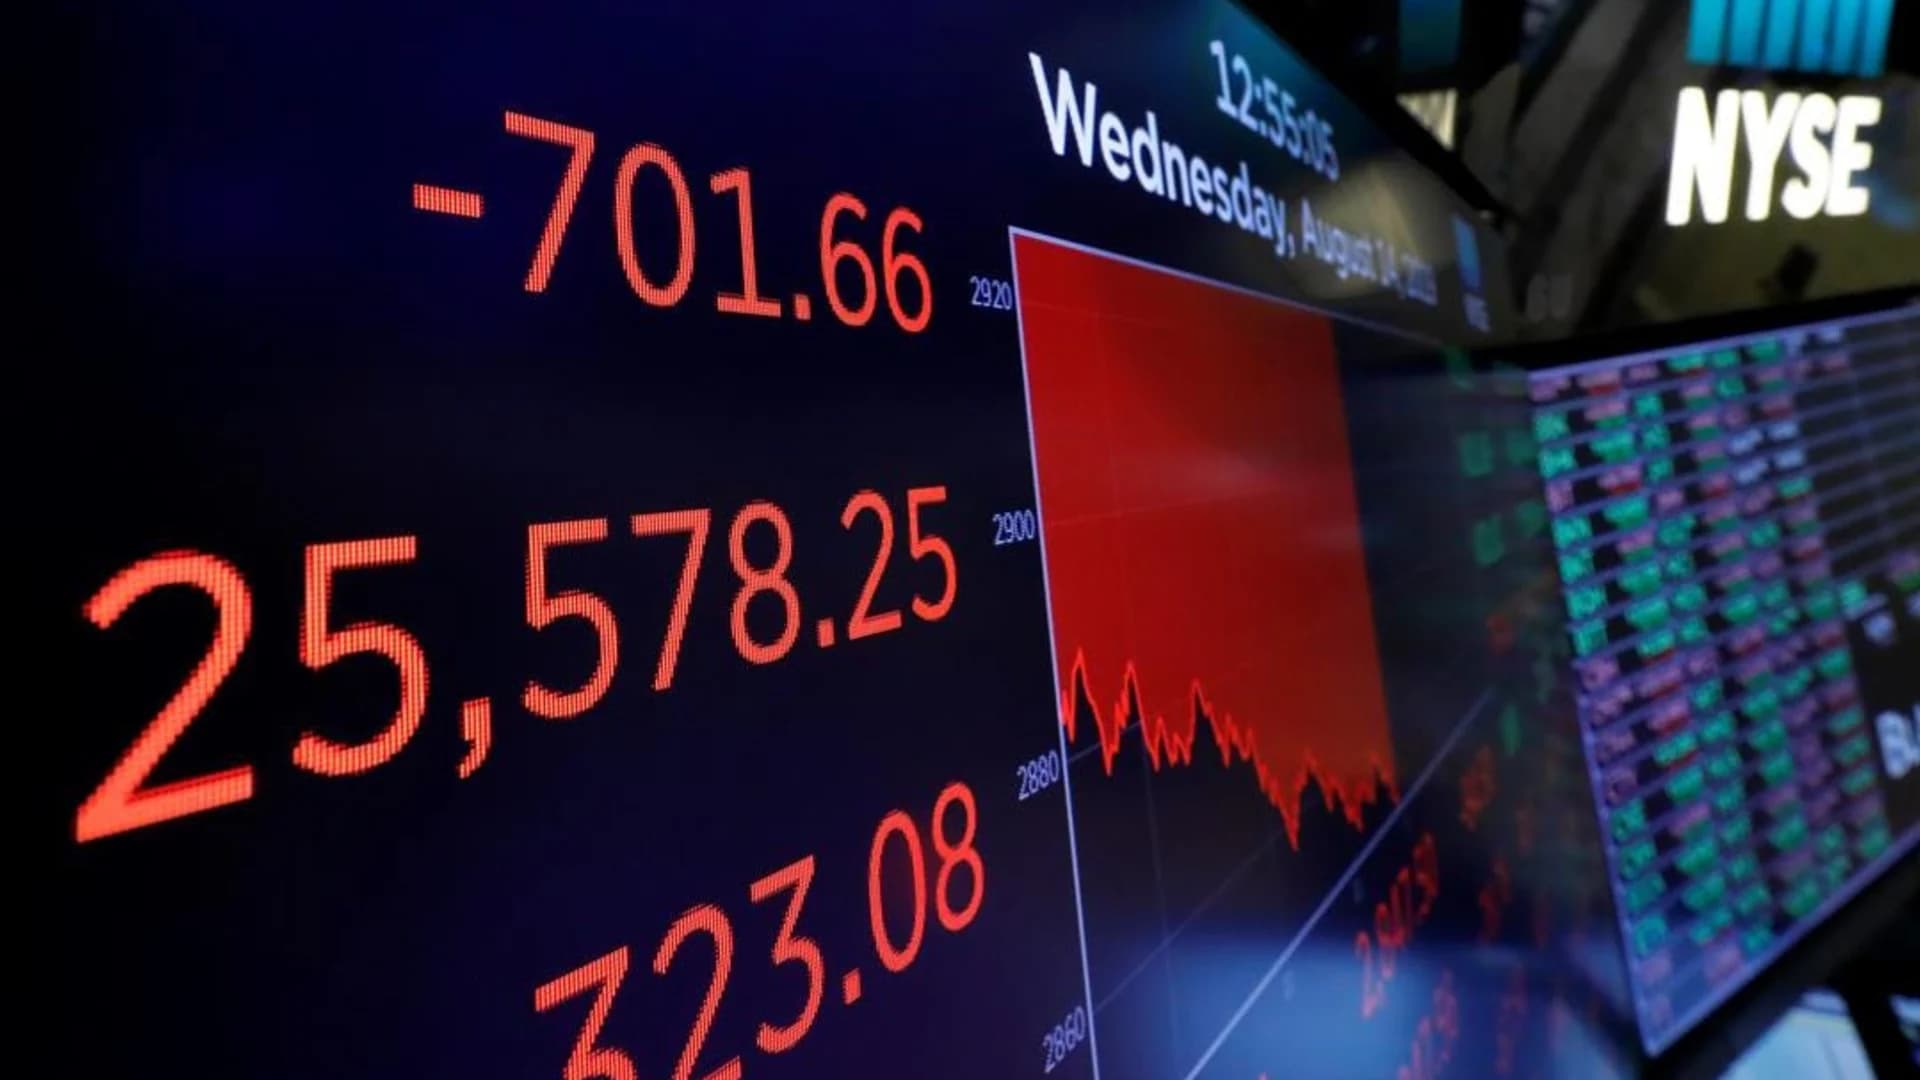 Dow slumps 800 points after bonds flash recession warning